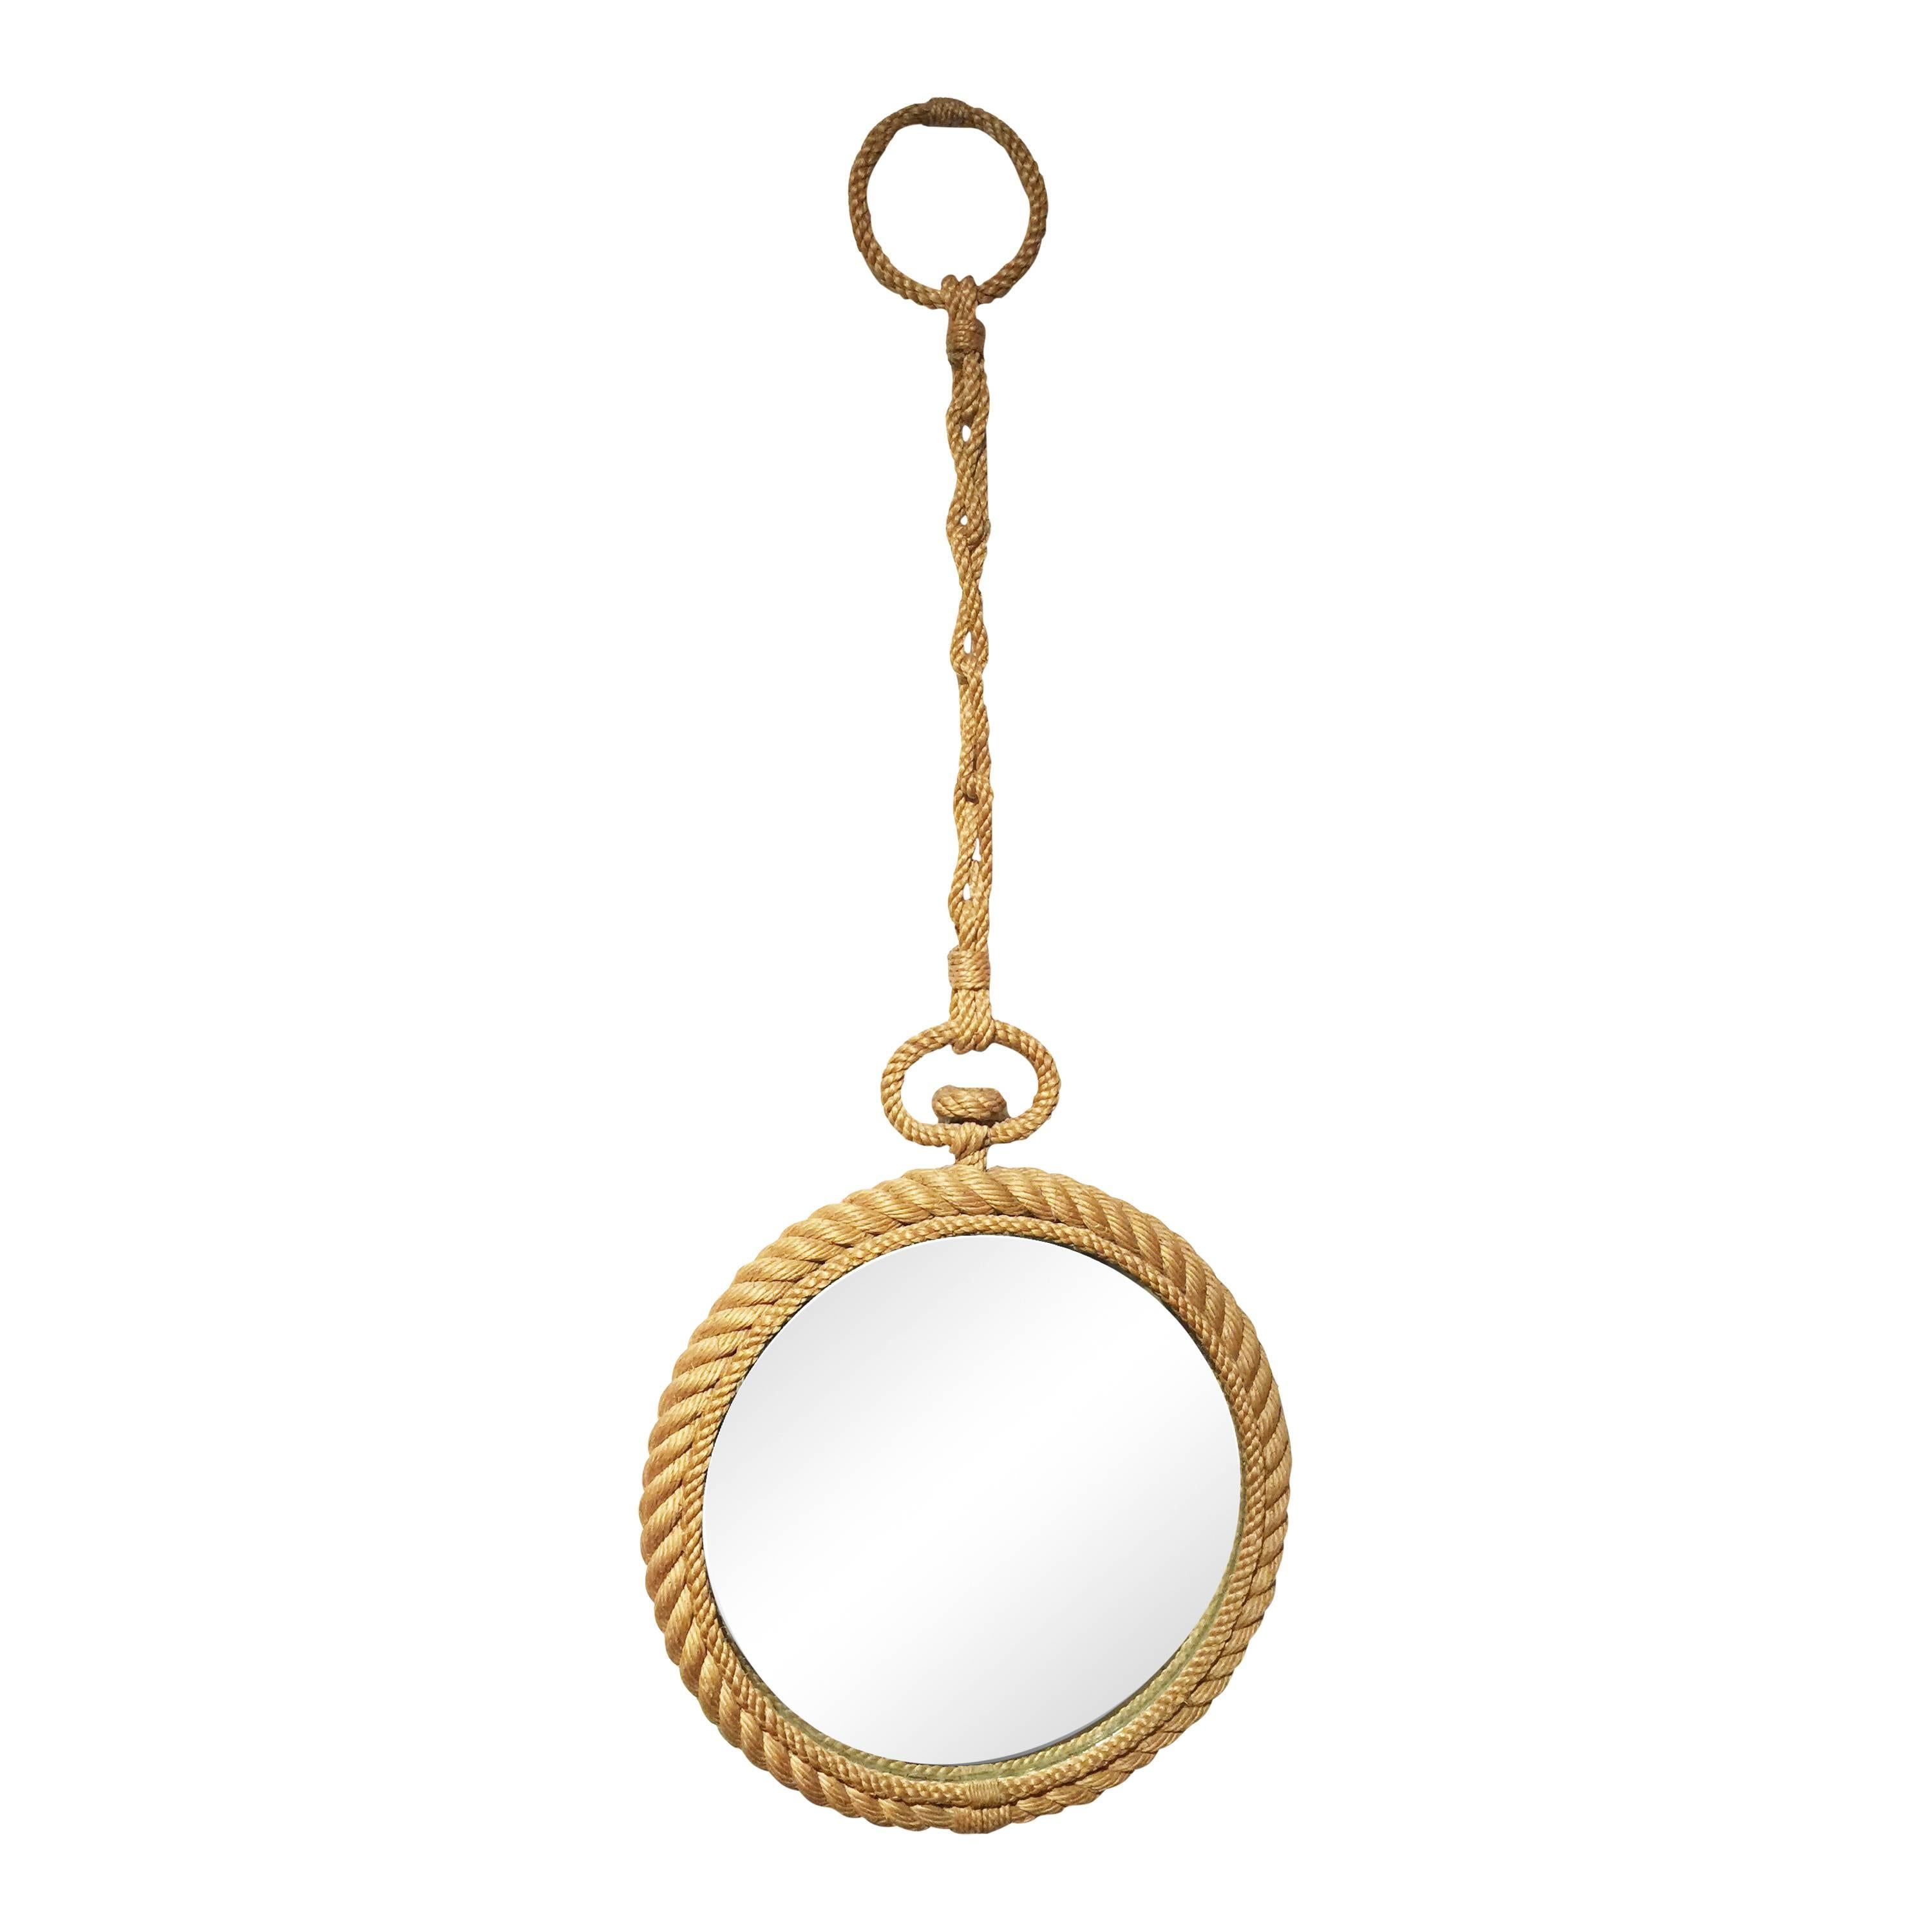 Mid-20th Century Rope Mirror in the Shape of Pocket Watch by Audoux Minet, France, 1960s